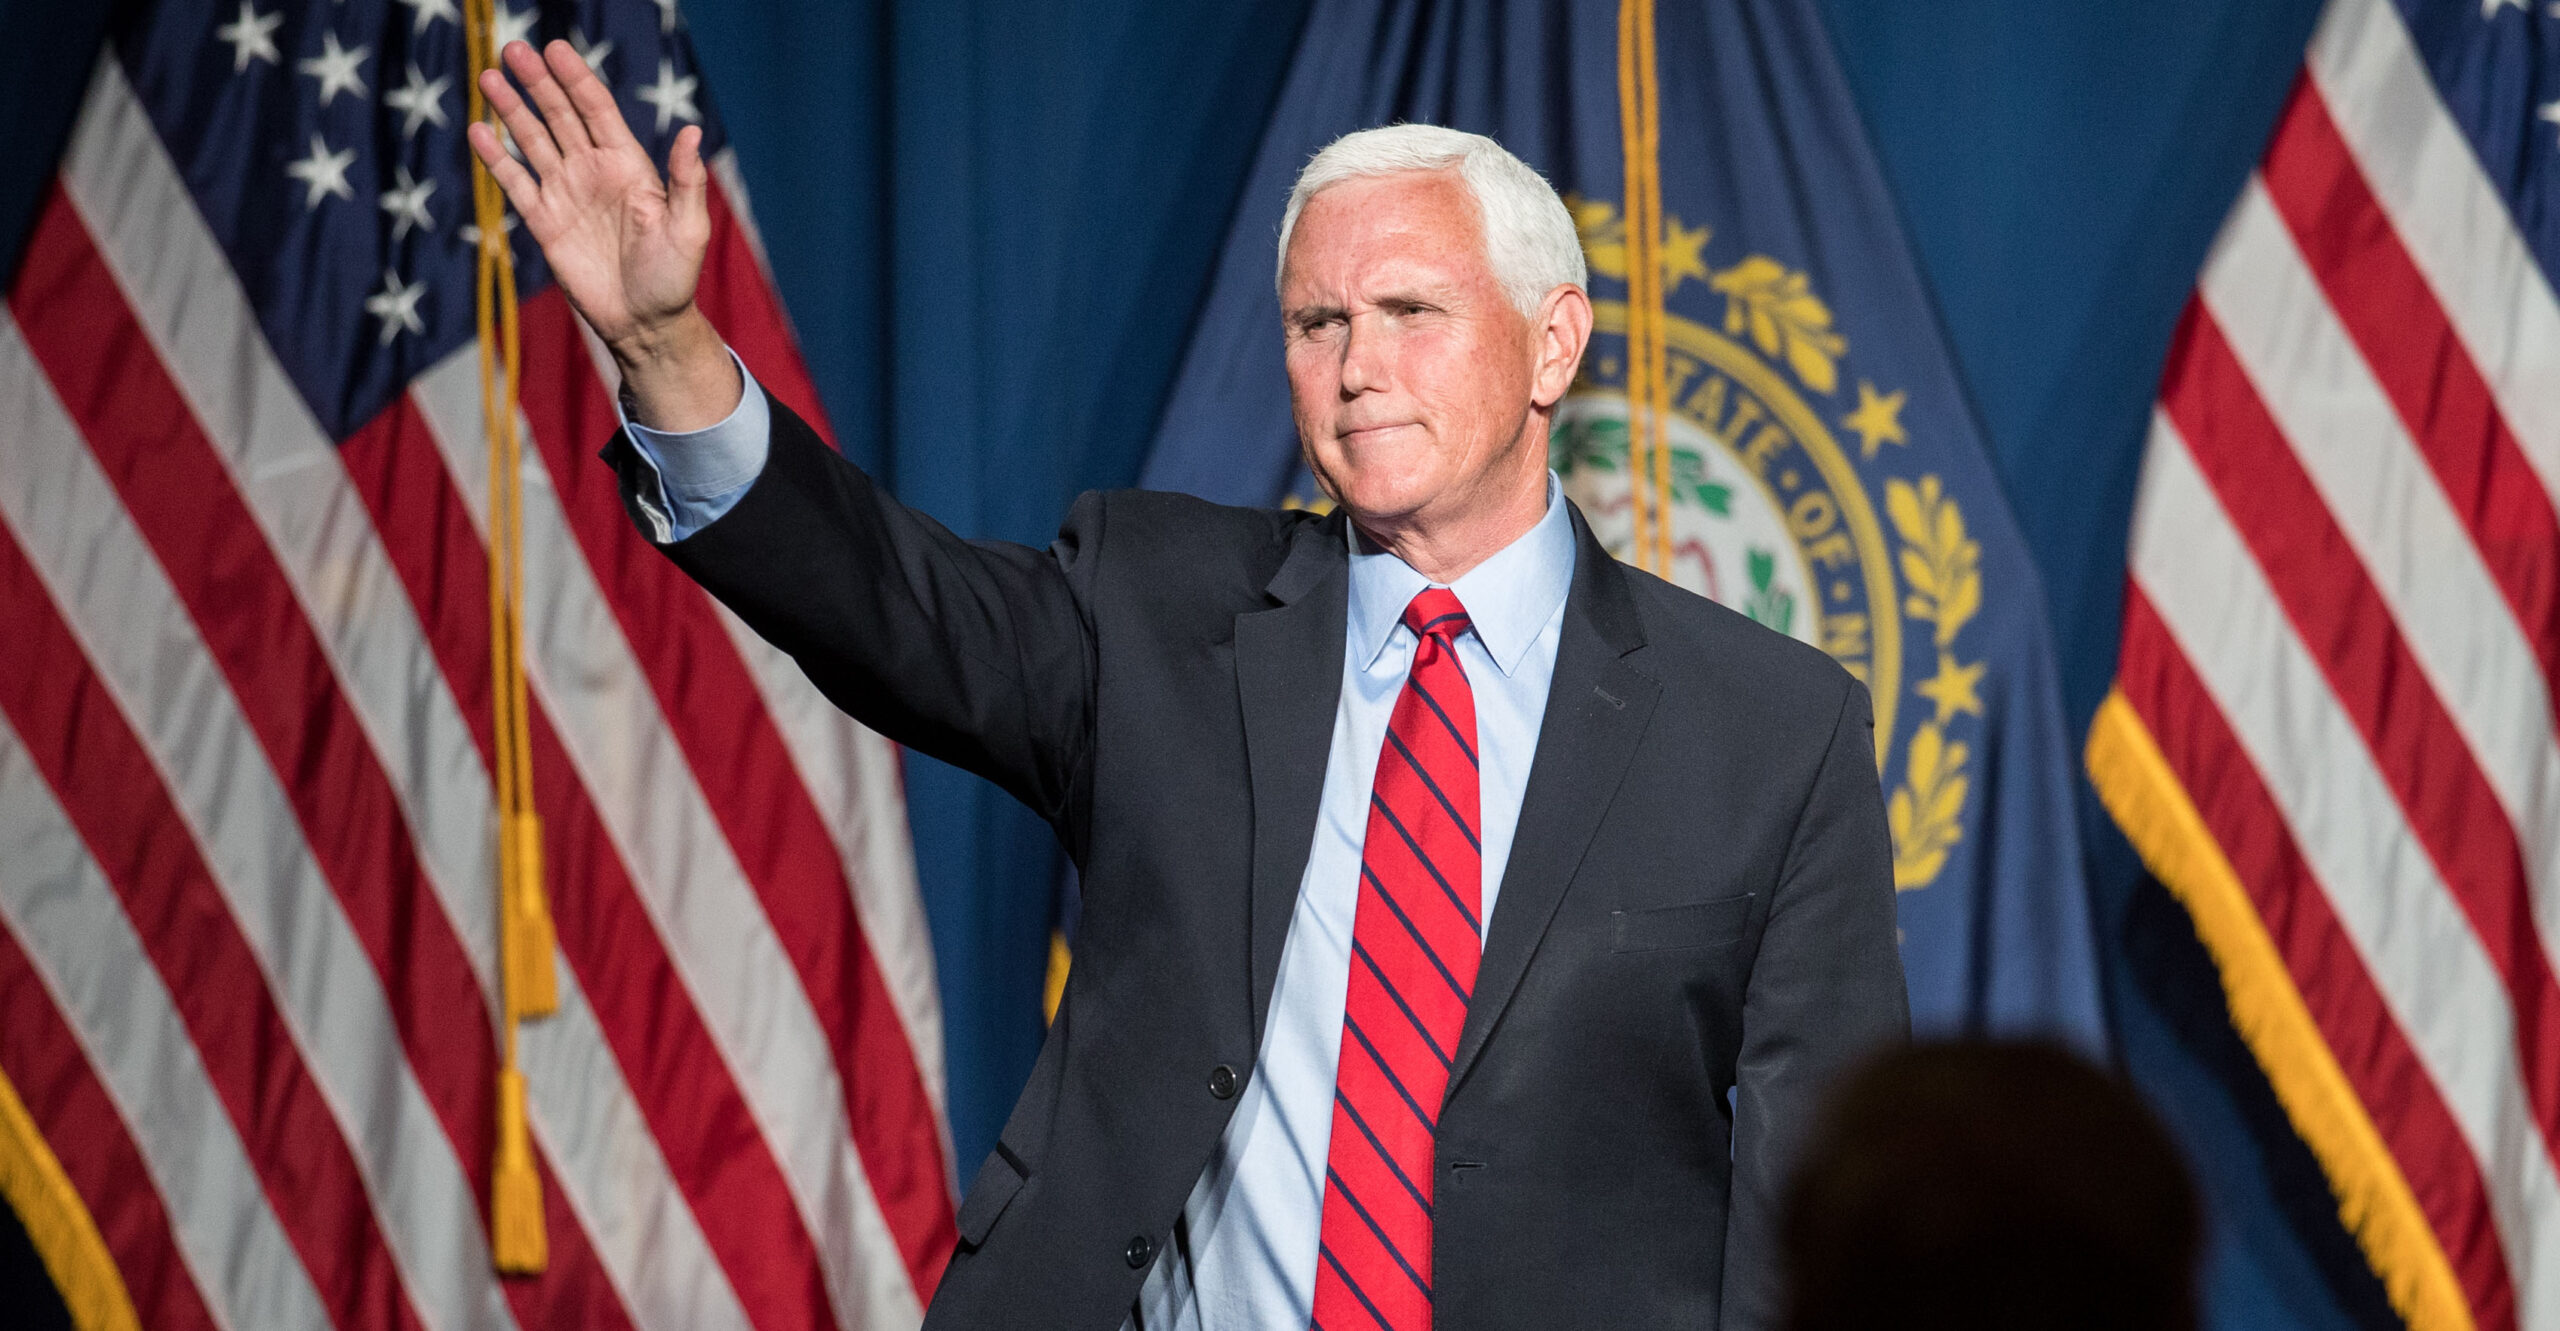 Pence Demands School Officials Resign for 'Cover-Up' of Sexual Assaults